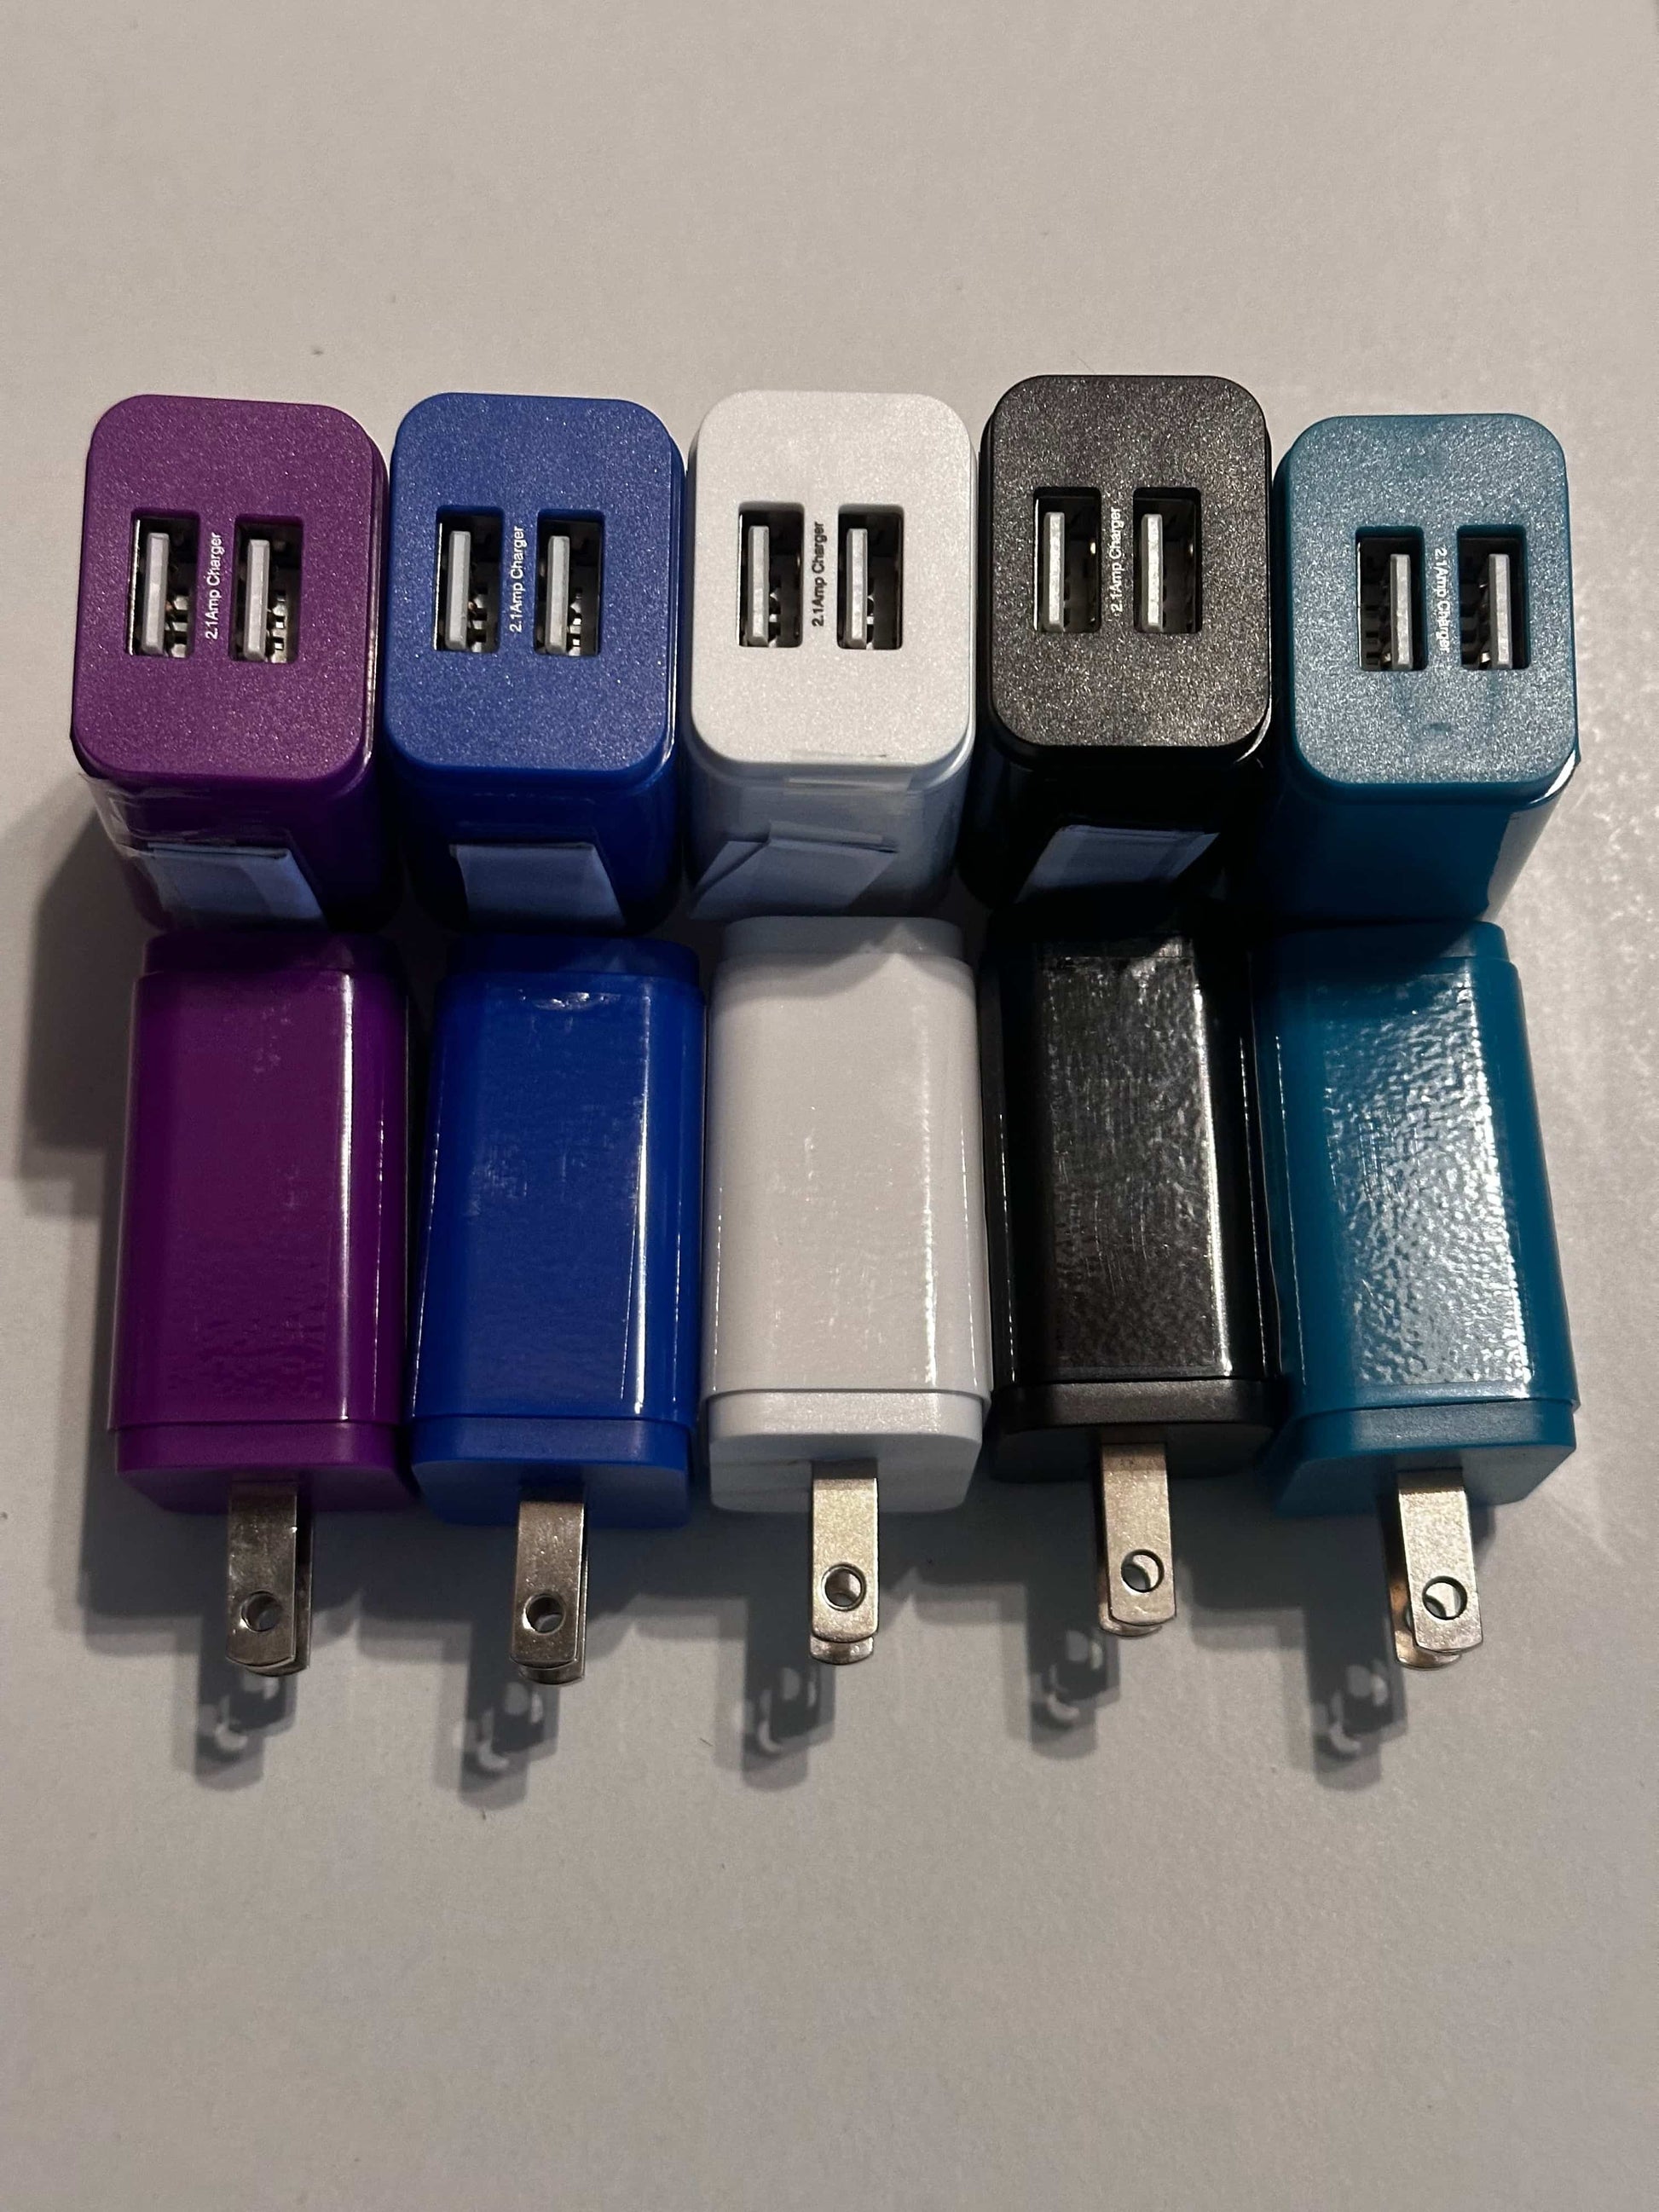 Duel USB Wall Adapter Blanks  